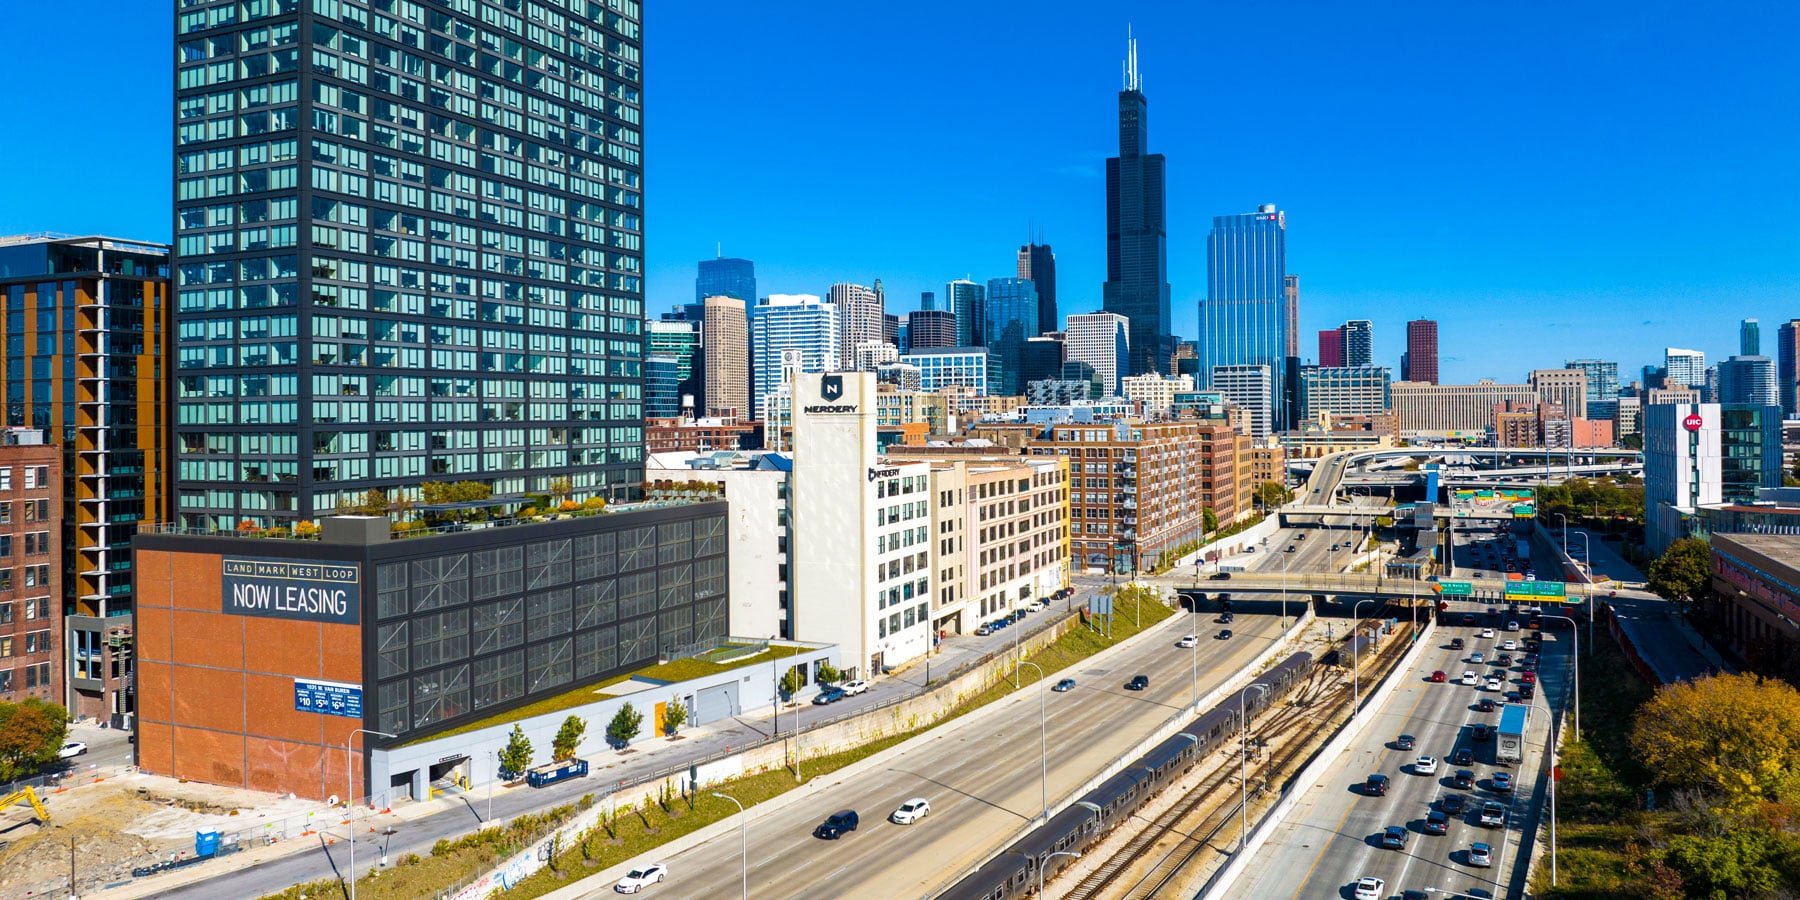 Eisenhower Expressway pictured here, facing slightly northeast with the University of Illinois Chicago on the right